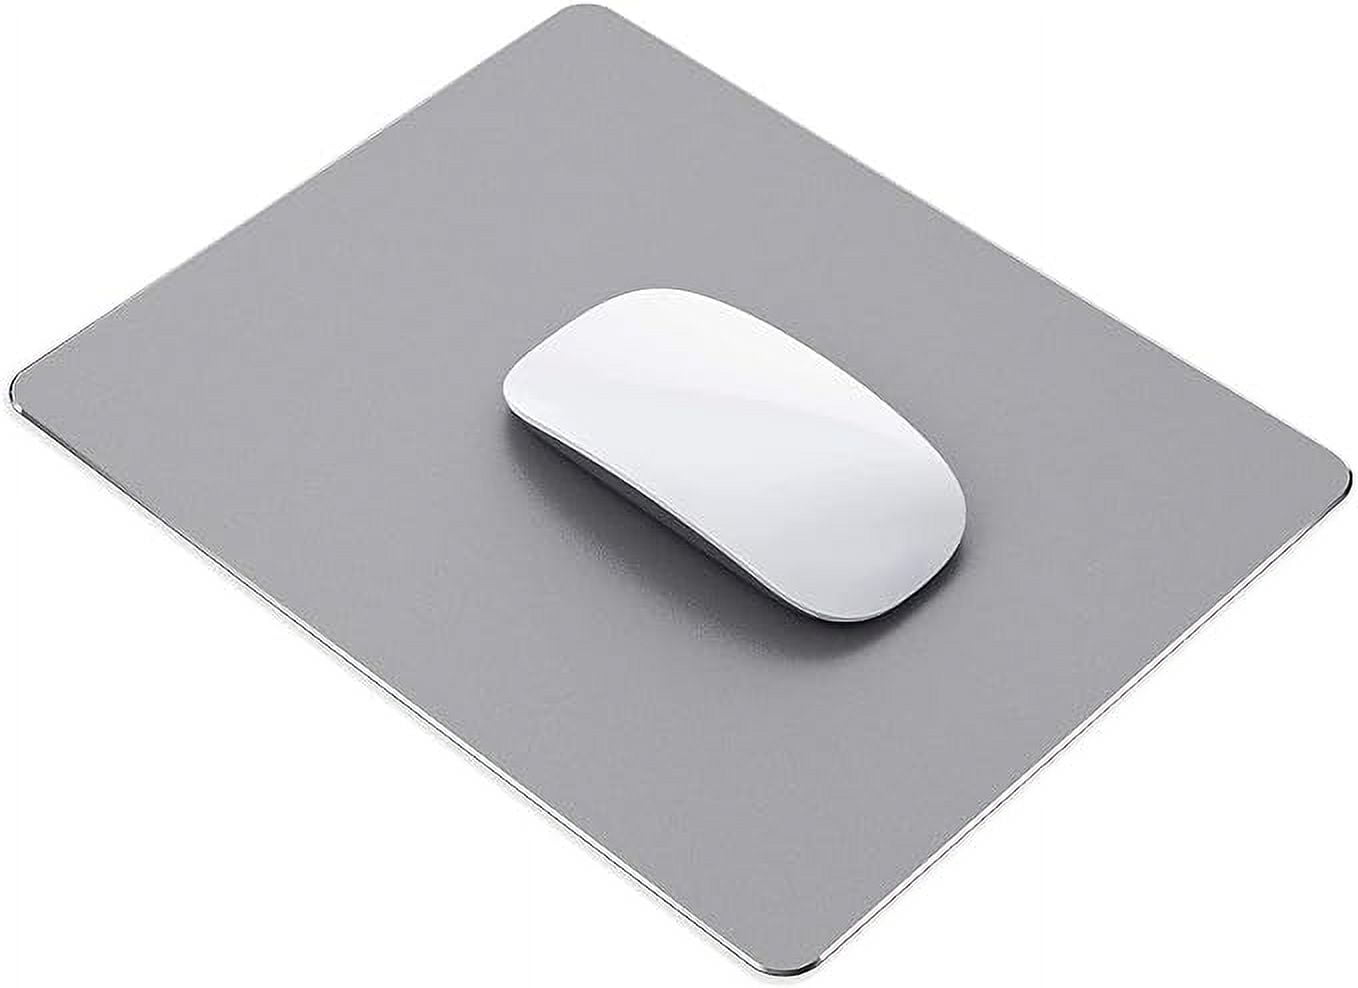 Aluminum Mouse Pad,Metal Hard Magic Mouse Pads,Double-Sided Mousepad Smooth  Ultra-Thin Waterproof.Suitable Office/Games,Fast Precise